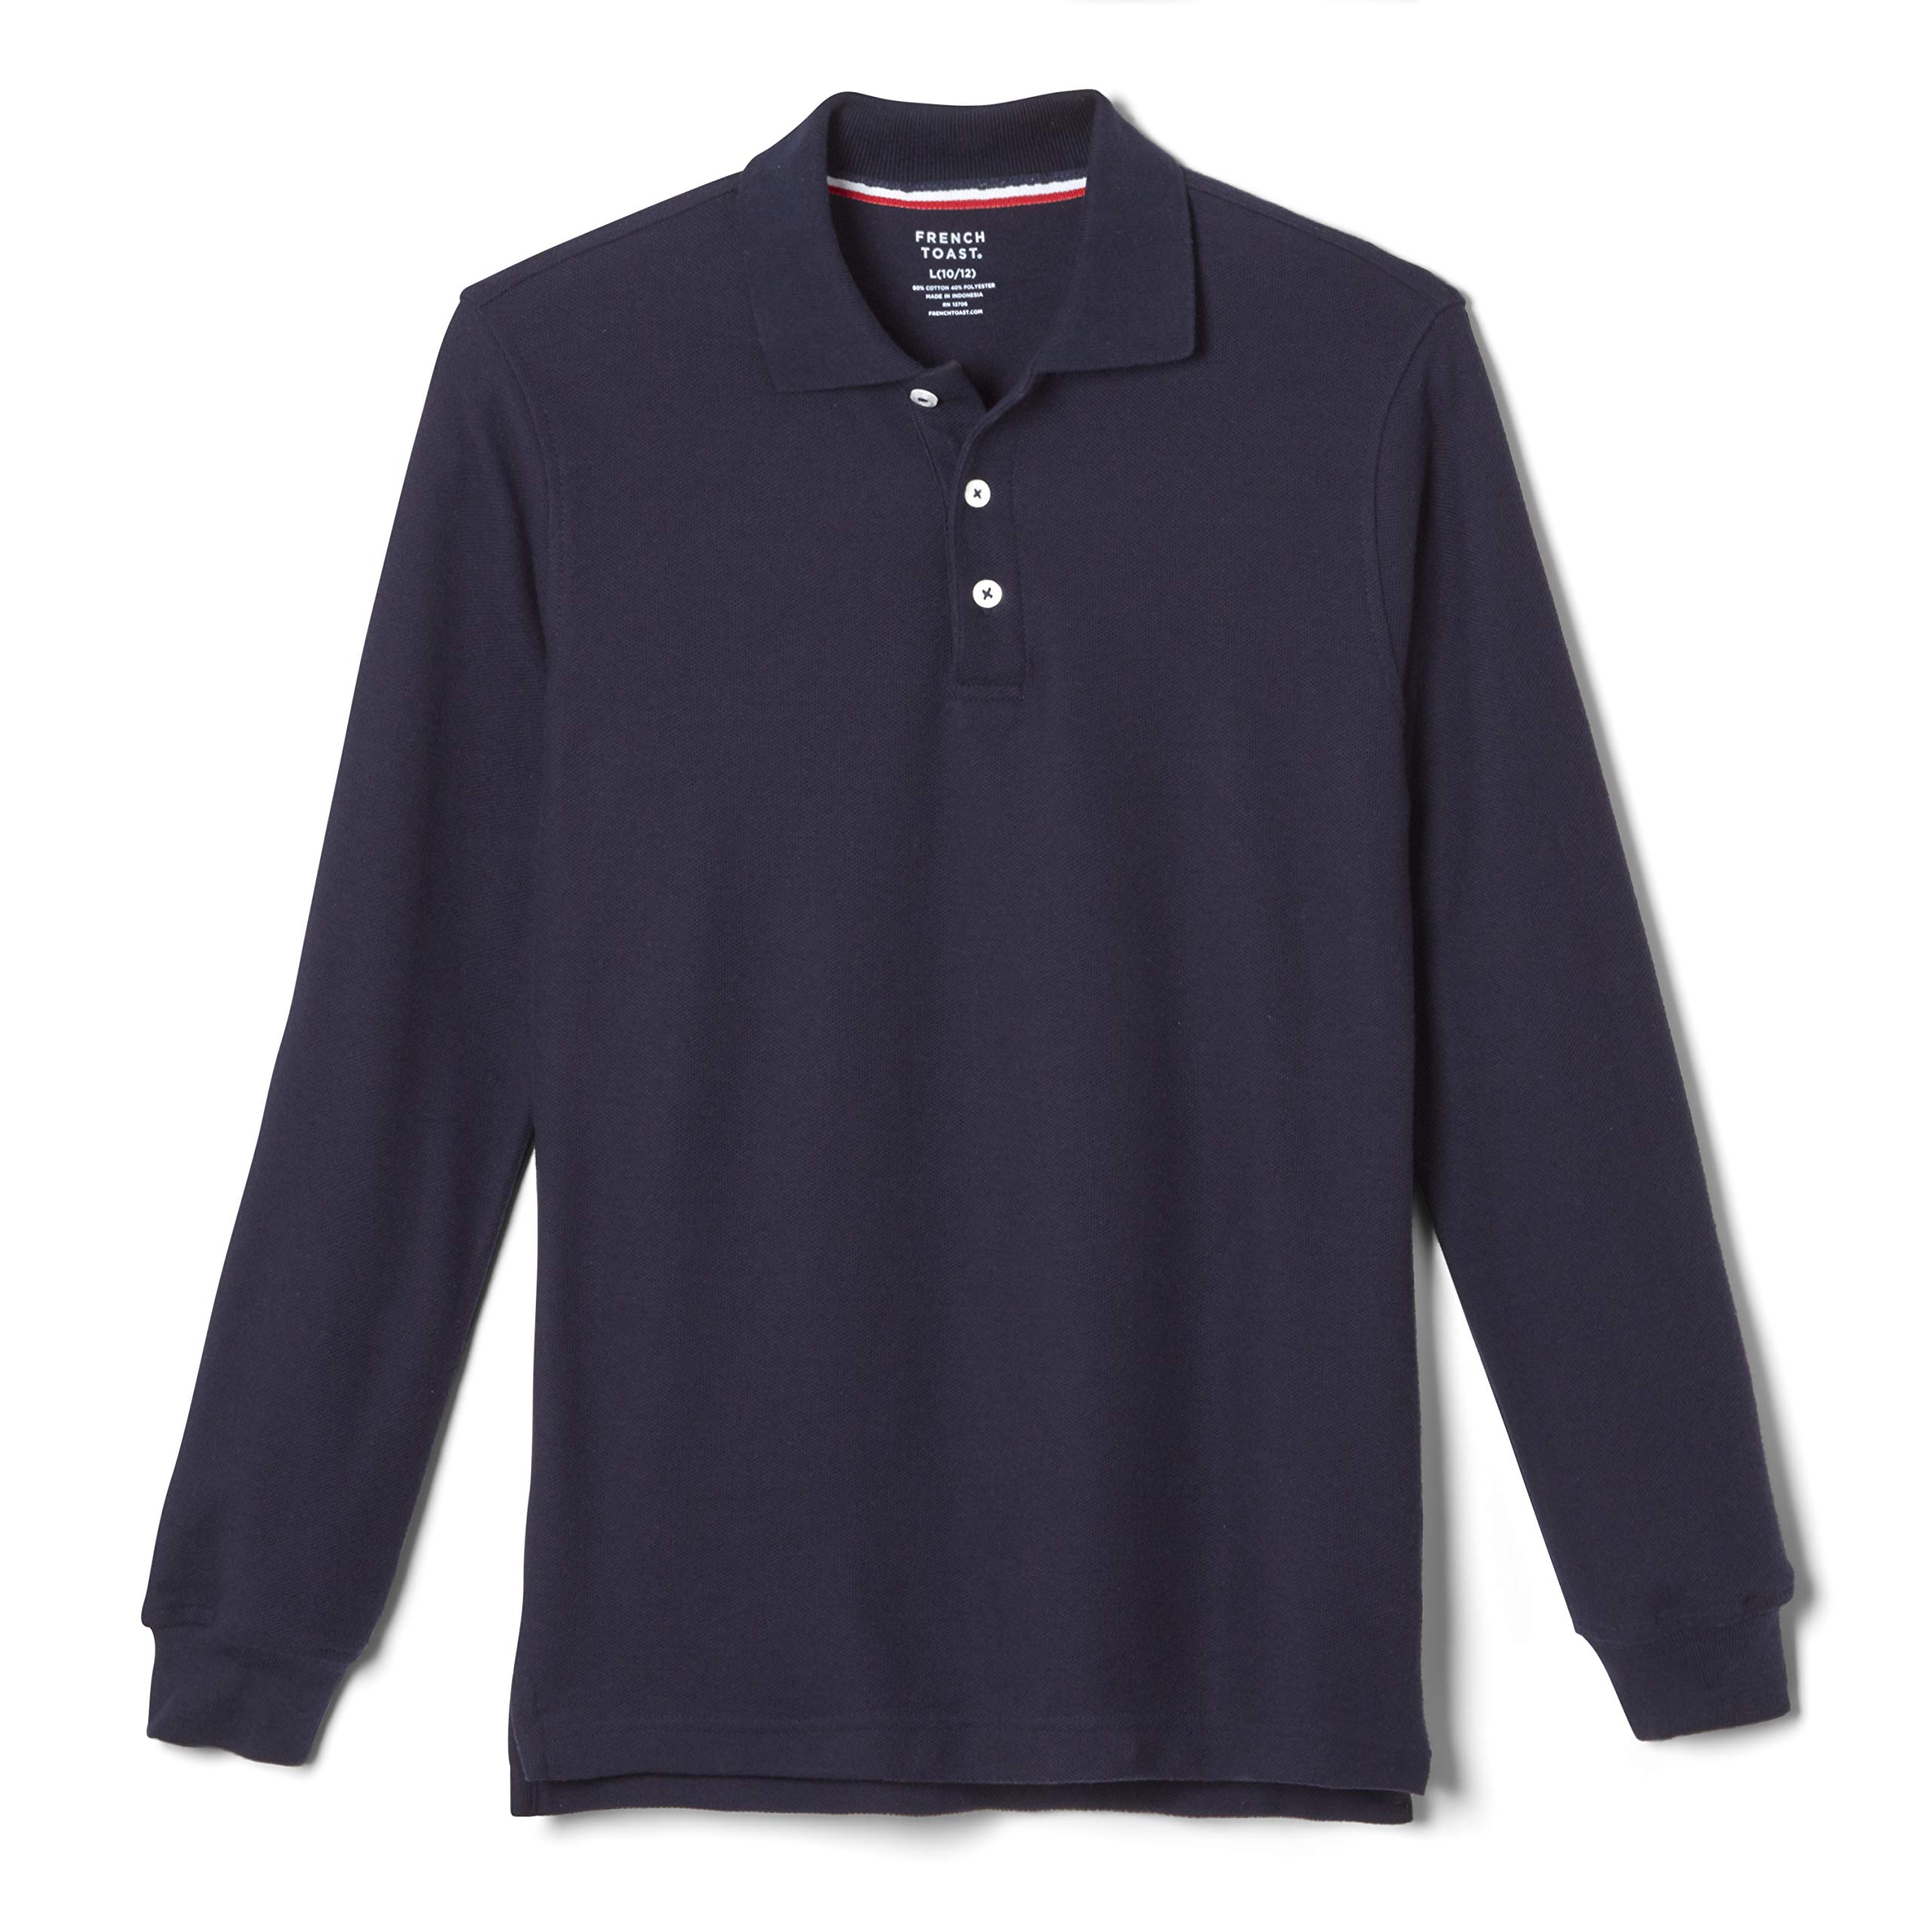 French Toast Big Pique Polo School Uniform Shirt with Long Sleeves for Boys and Girls, Navy, 10-12